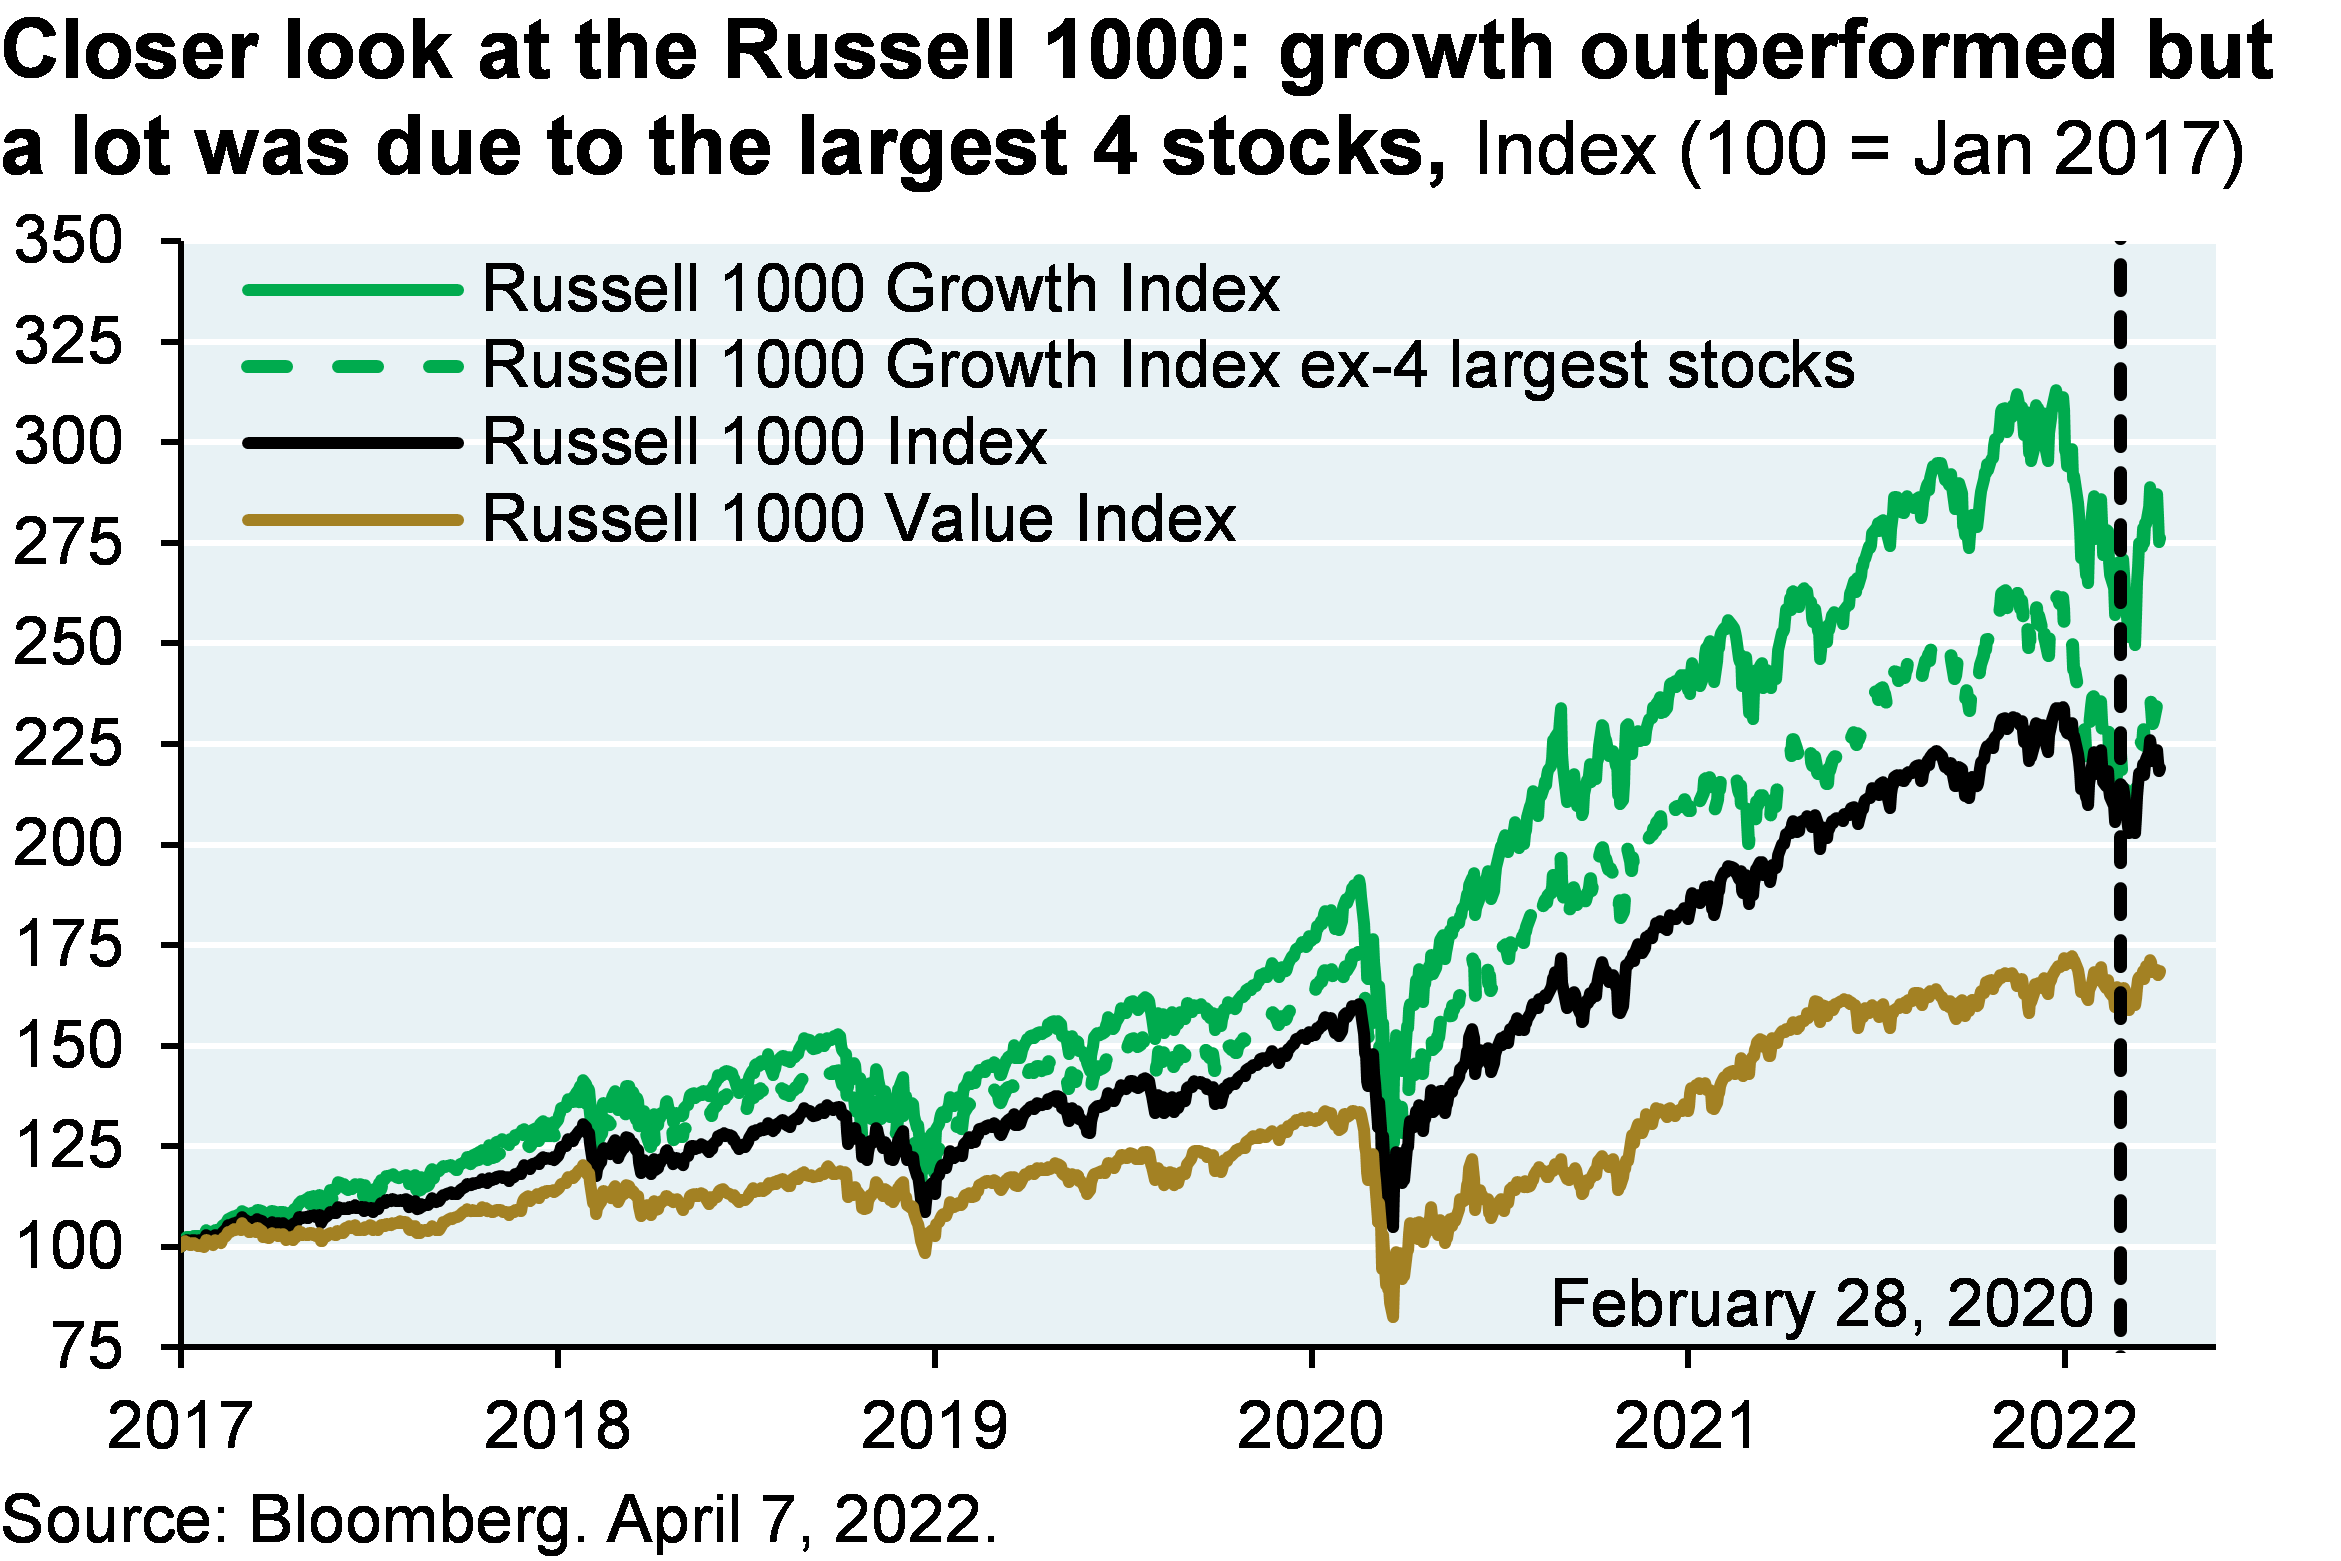 Line chart compares the performance of the Russell 1000, the Russell 1000 Value, the Russell 1000 Growth and the Russell 1000 Growth excluding the top 4 stocks. Excluding the top 4 stocks in the later results in performance that is much closer to the Russell 1000 Index.